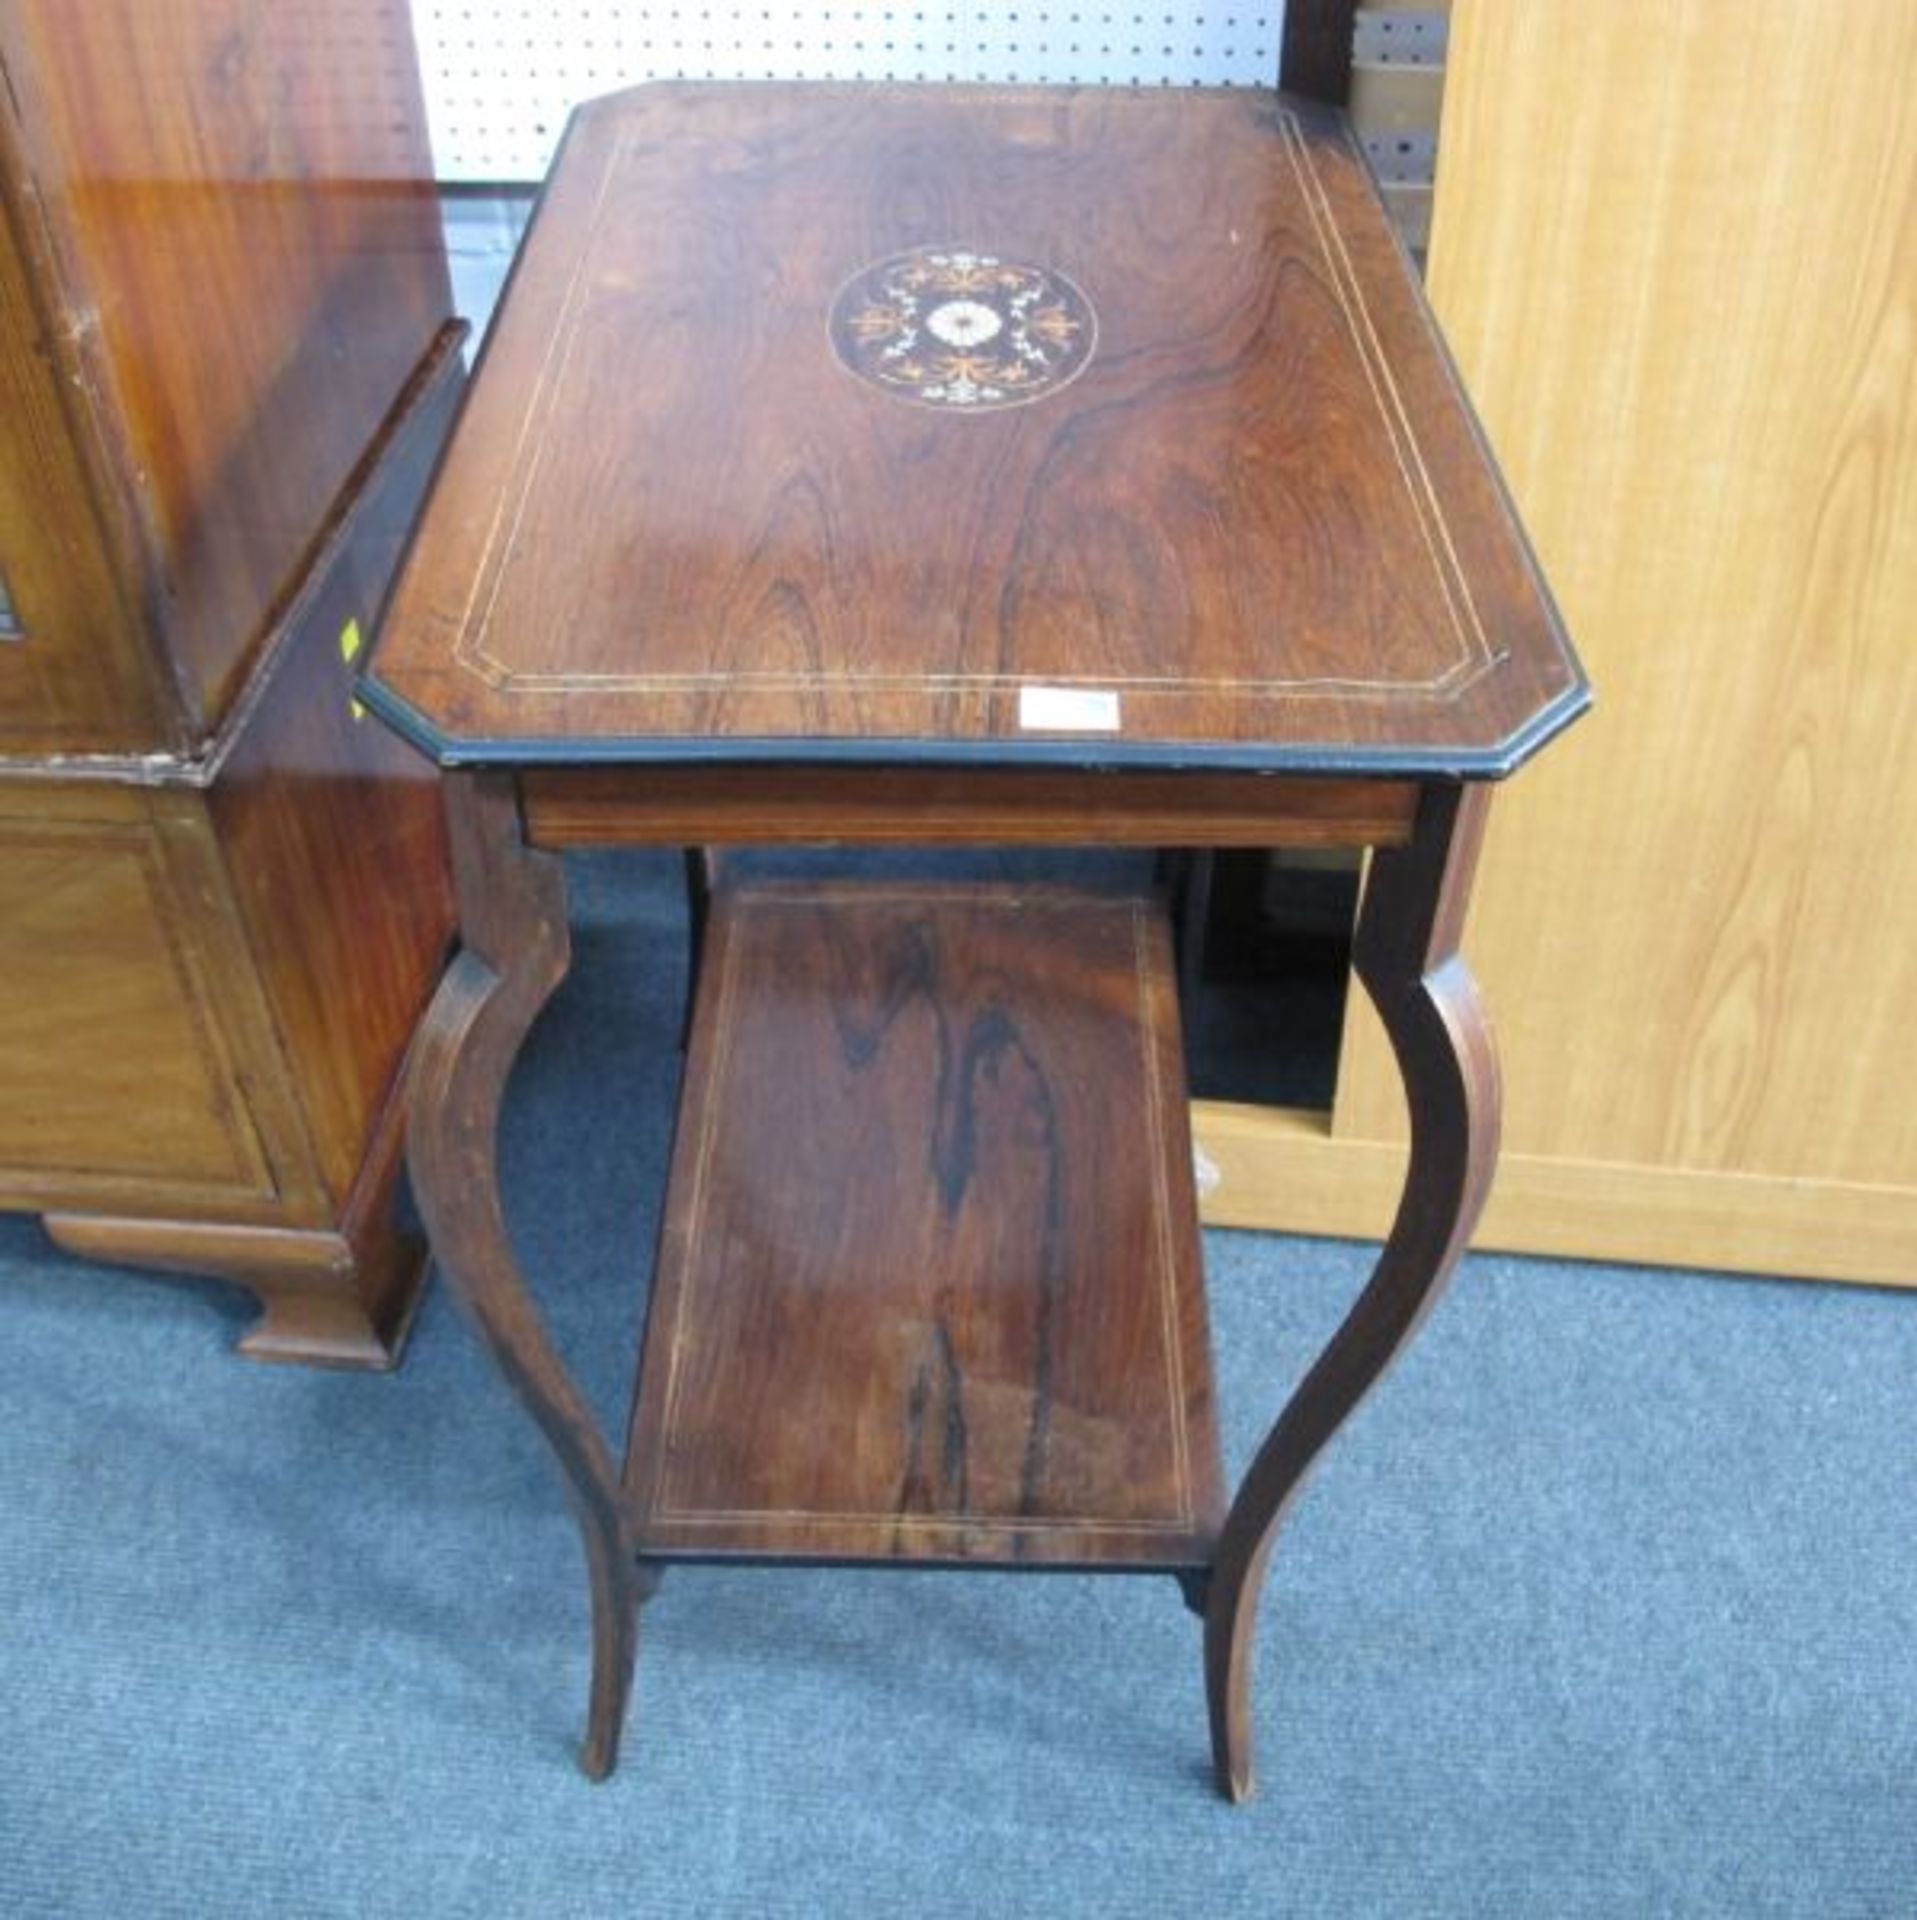 An Edwardian Marquetry Inlaid Rosewood Octagonal Two-Tier Occasional Table. (est. £30-£40)